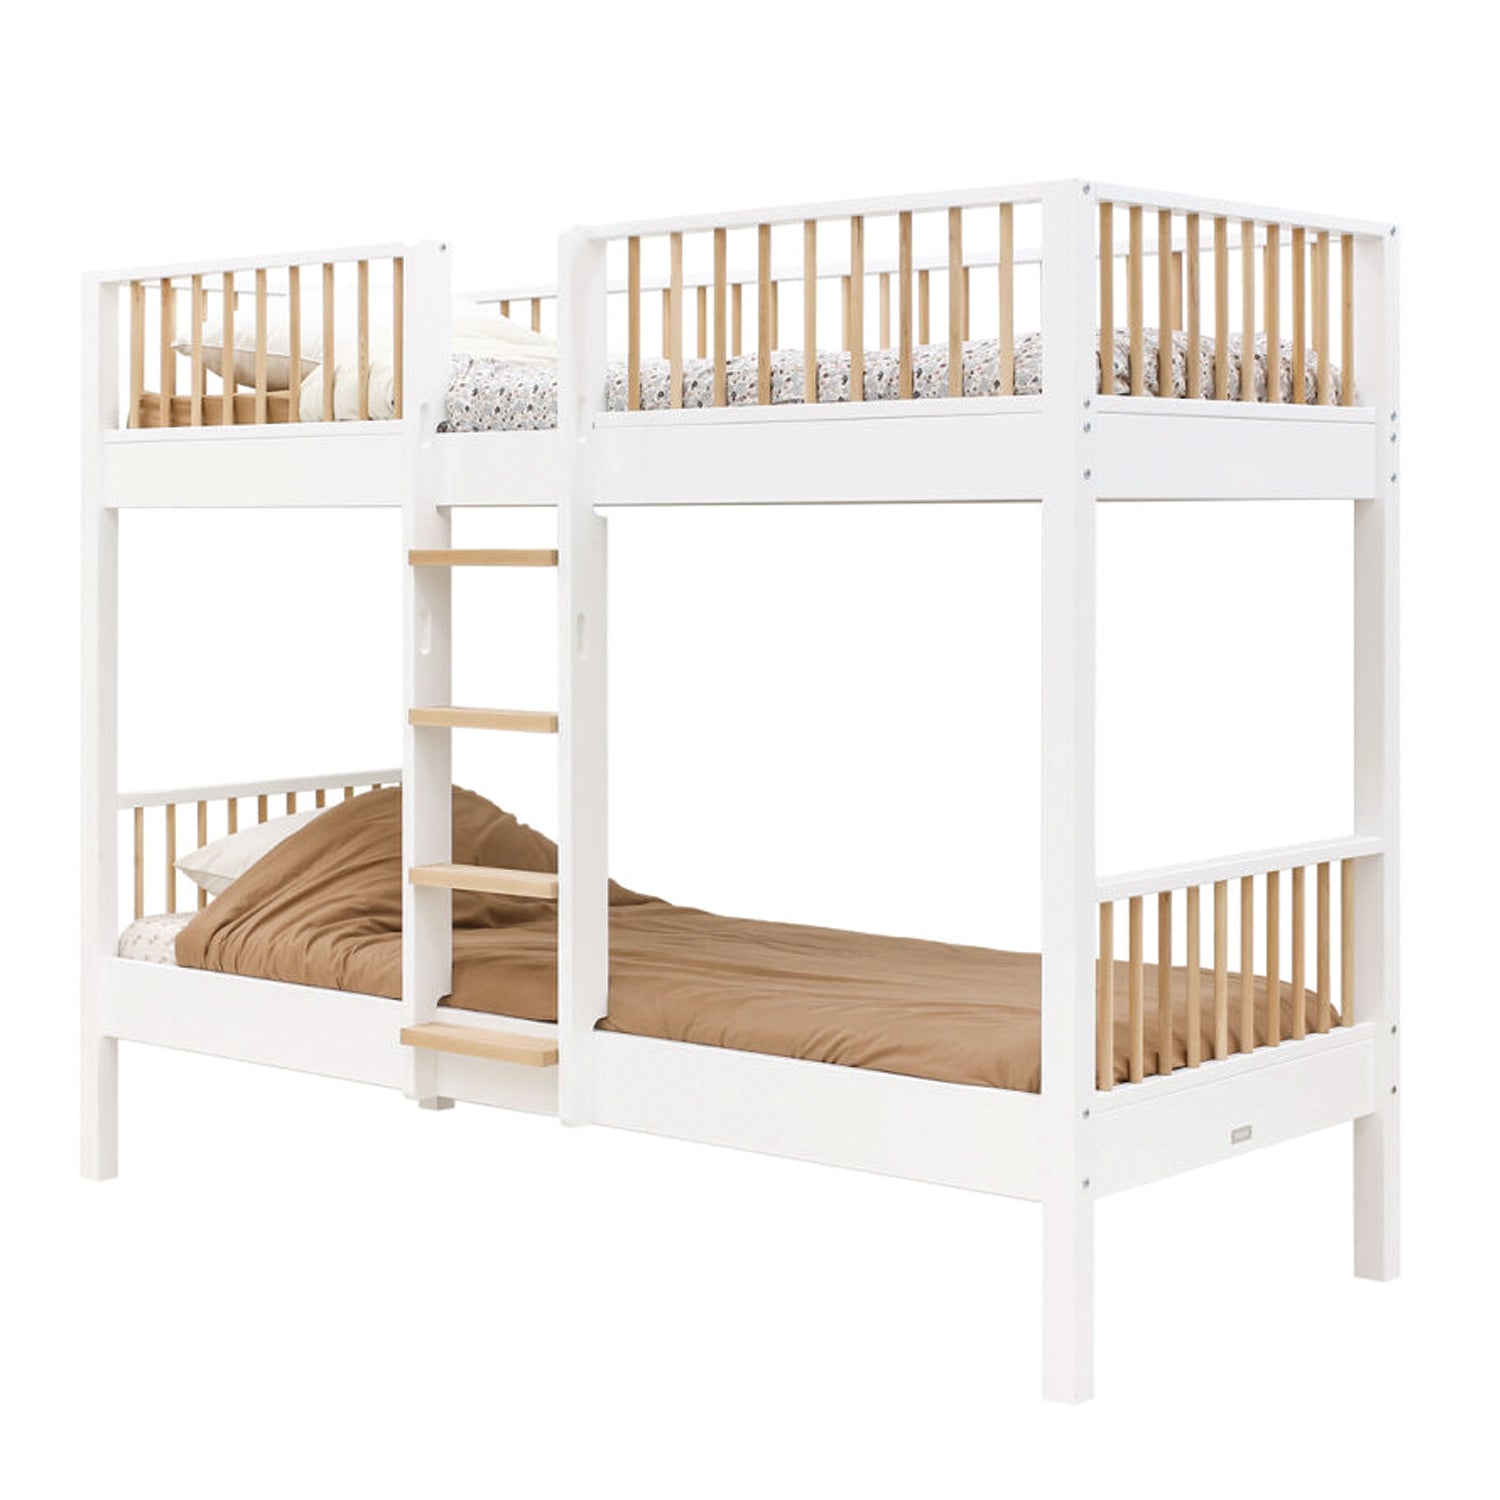 Deer Industries Kids Store Singapore, Kids Furniture Singapore, Kids Beds Singapore, Kids Bunk Bed, Bunk Bed in White & Wood, Kids Bunk Bed with storage drawer, Kids Bunk Bed with trundle, Free delivery & assembly